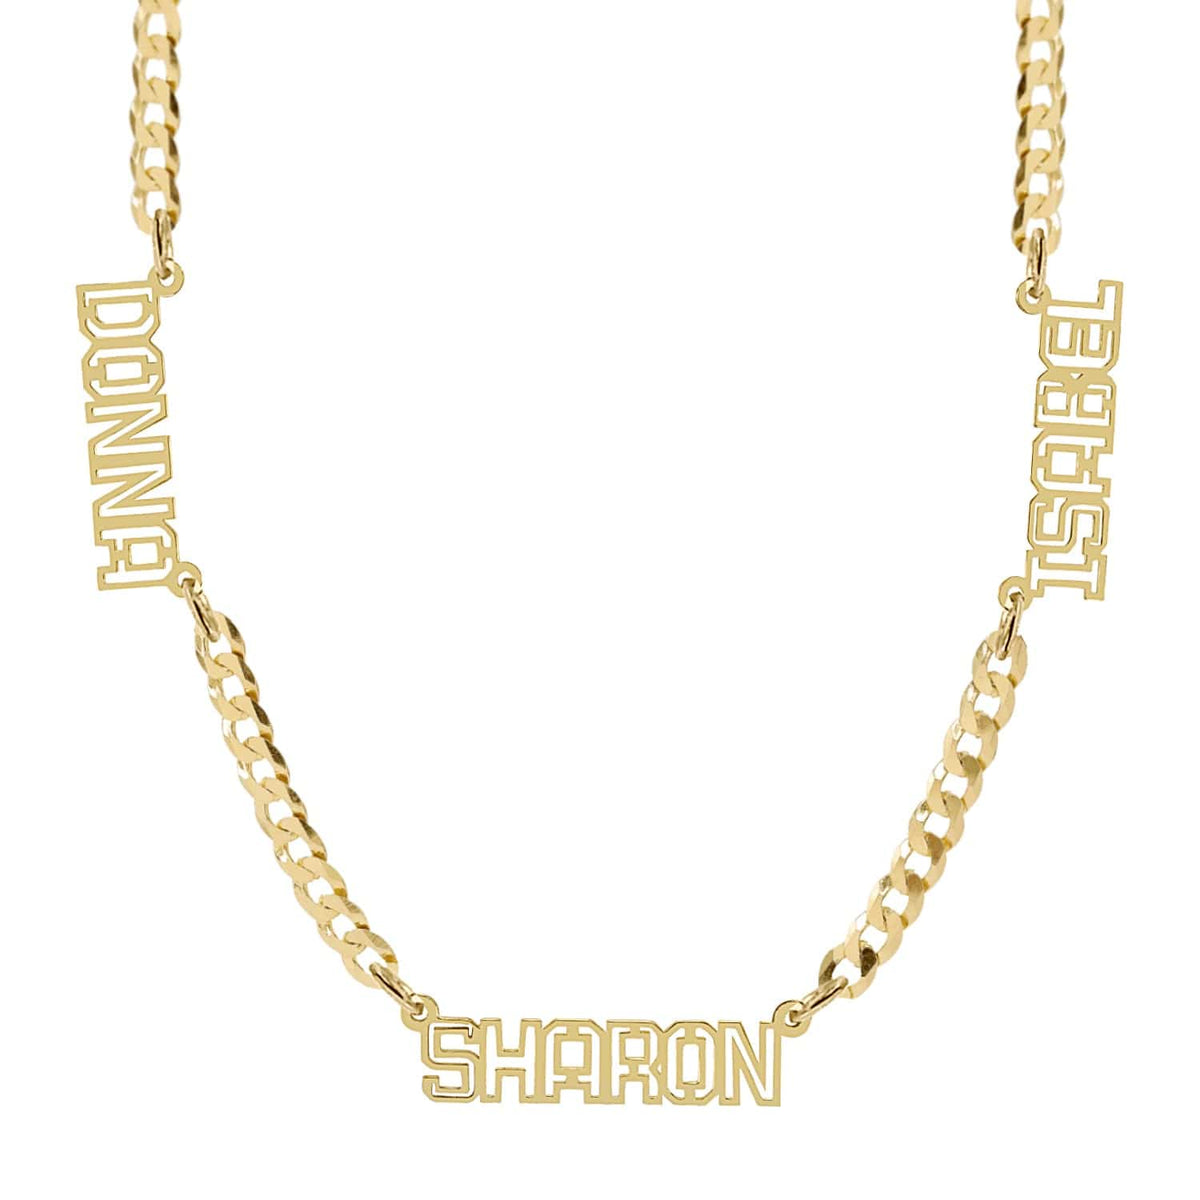 14k Gold over Sterling Silver / Cuban Chain Personalized Nameplate Necklace w/ Three Cut-Out Names on Cuban Chain